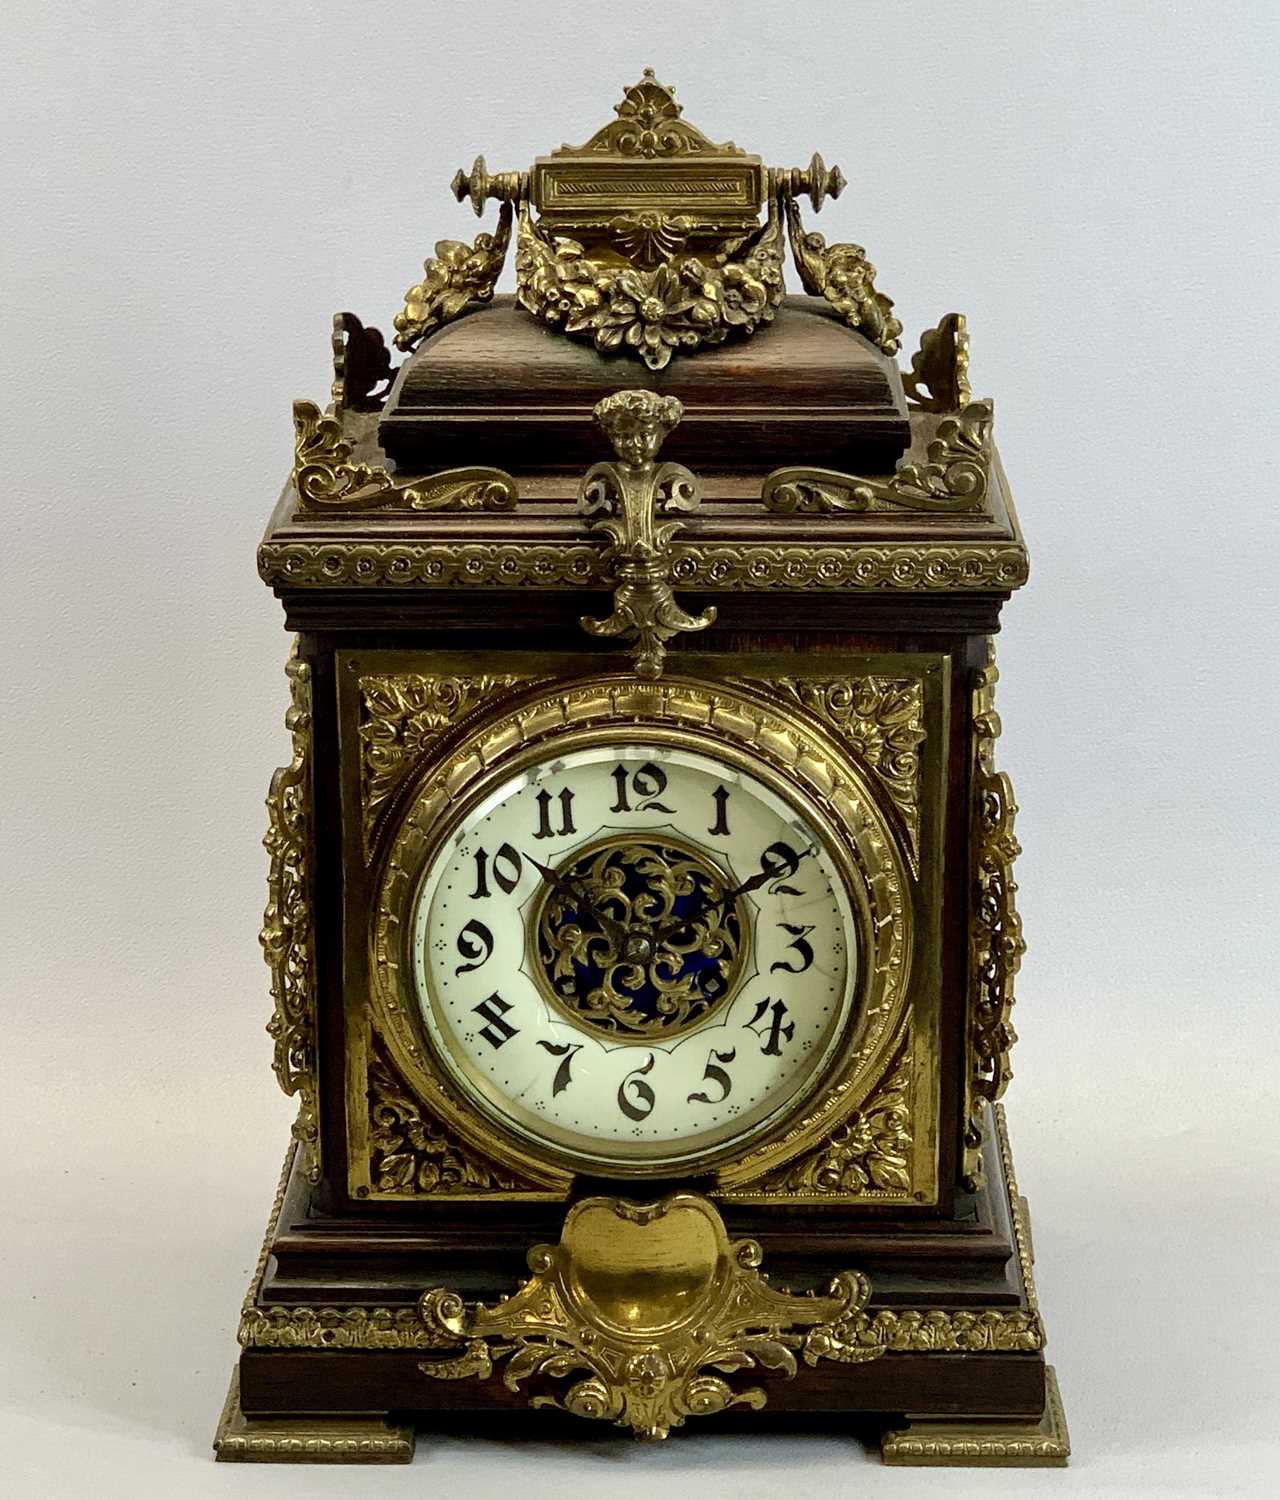 A FRENCH OAK & GILDED ORMOLU MOUNTED MANTEL CLOCK - late 19th Century, cream ceramic dial with black